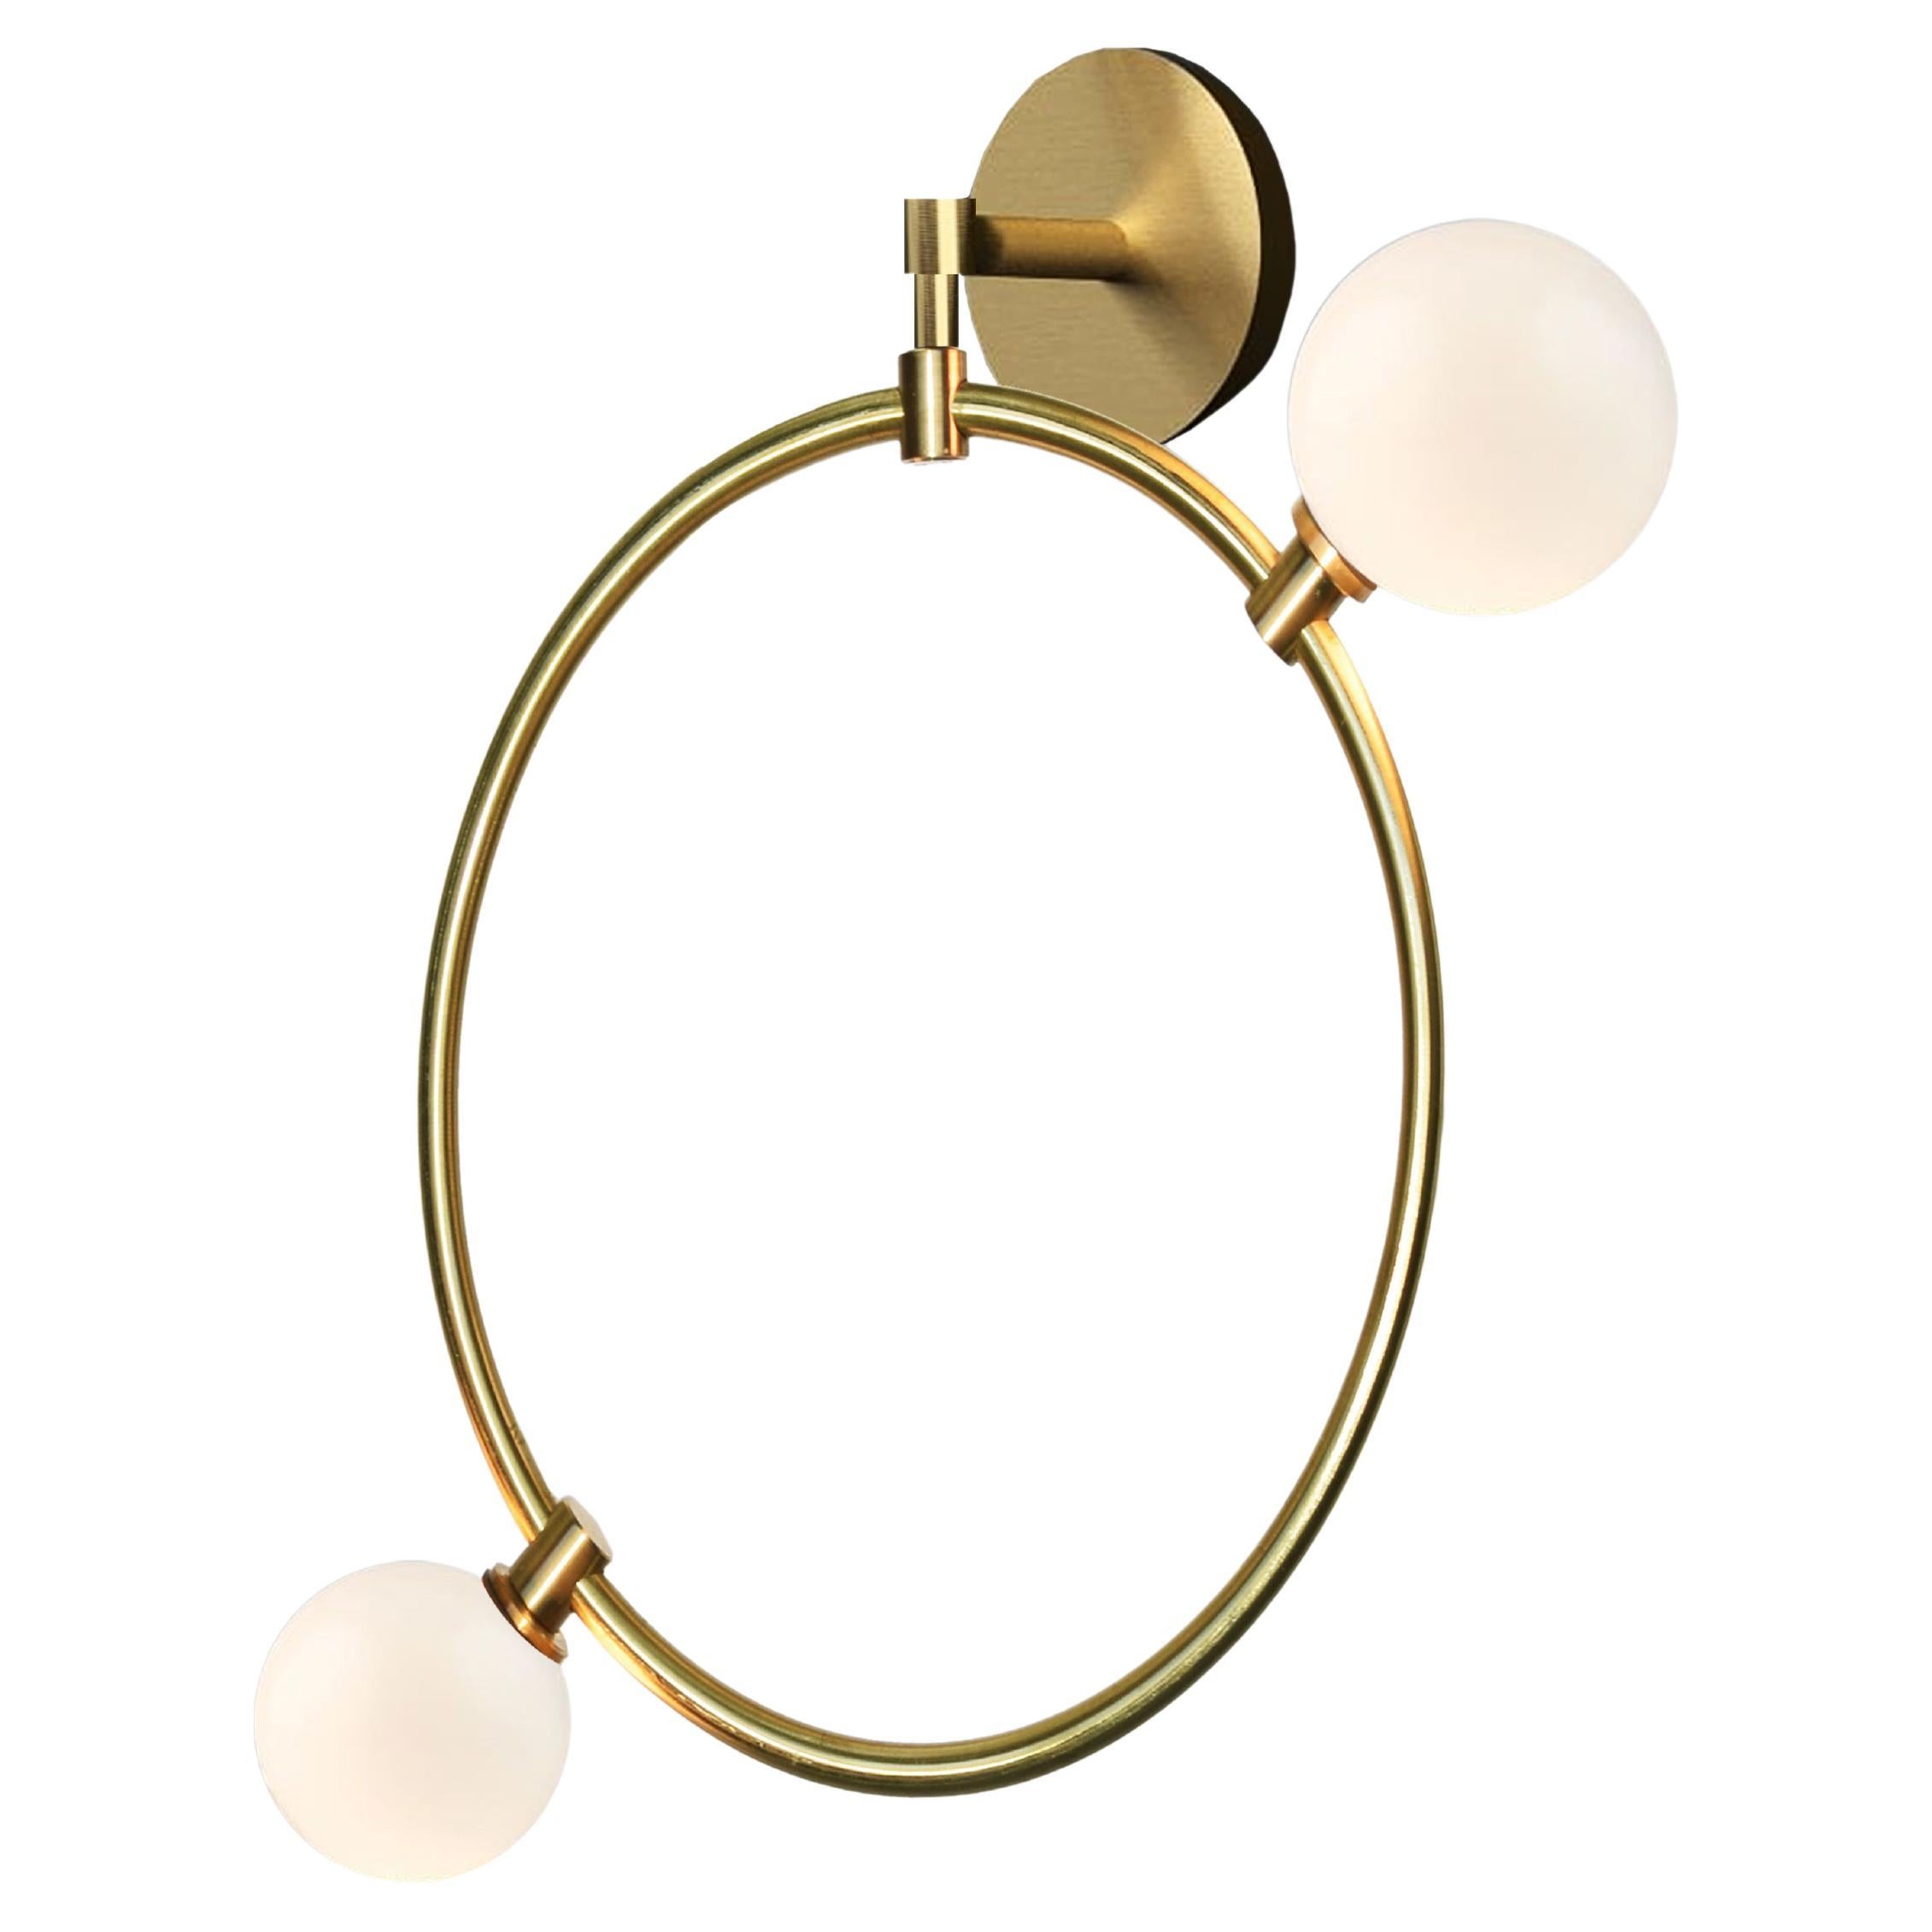 'Drops Wall - Large' by Marc Wood. Handmade Brass Ring Lamp, Opal Glass Shades